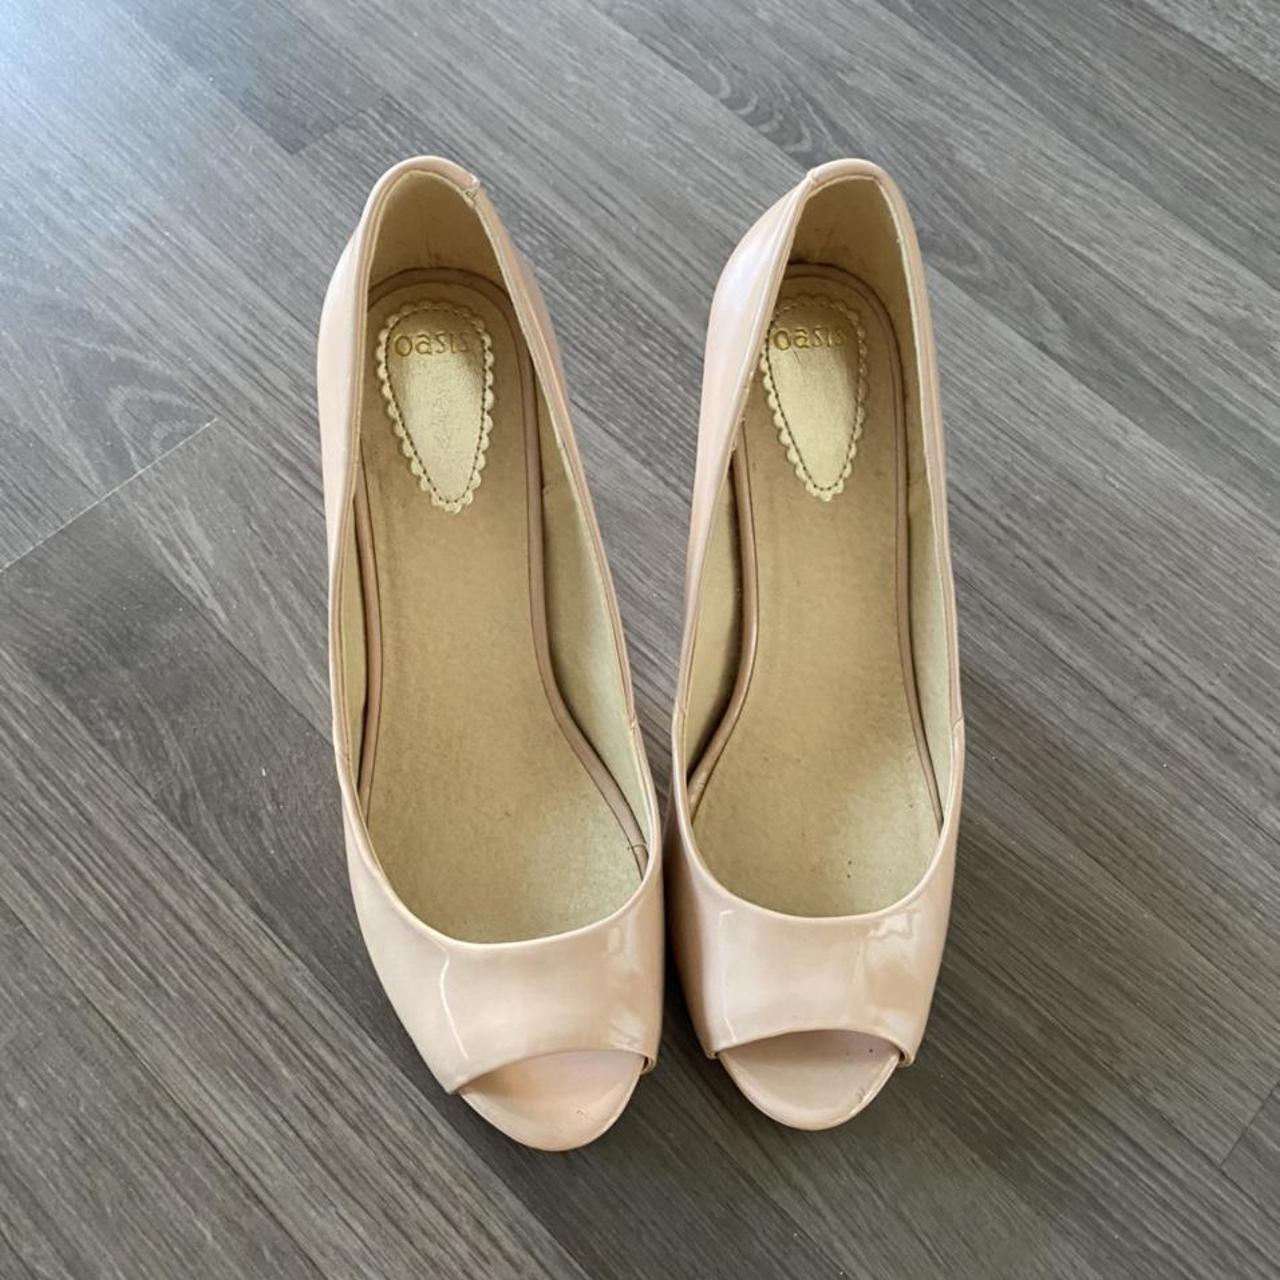 Oasis Women's Tan and Cream Courts | Depop